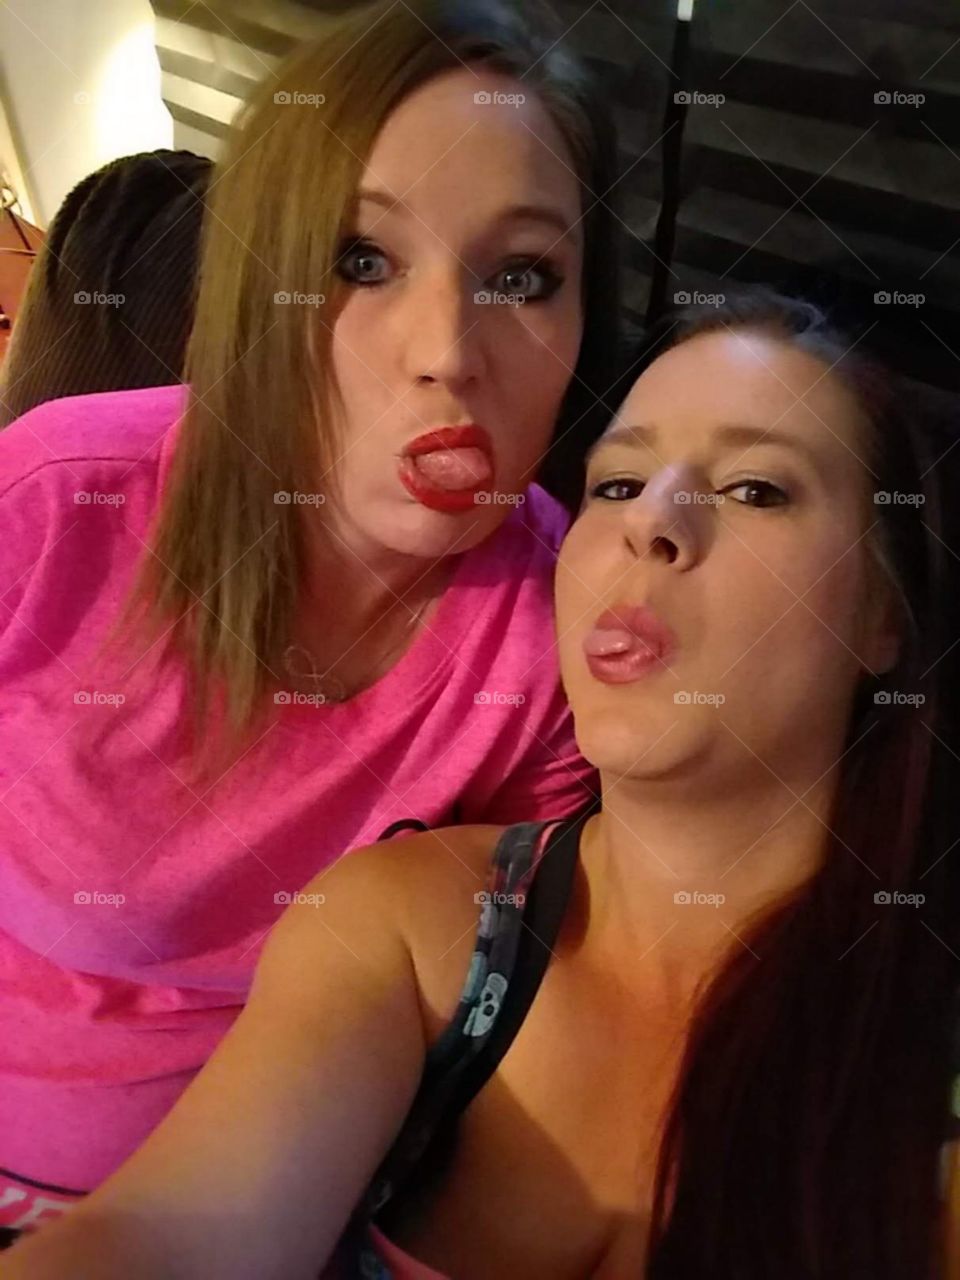 Besties making funny faces. Just being silly.